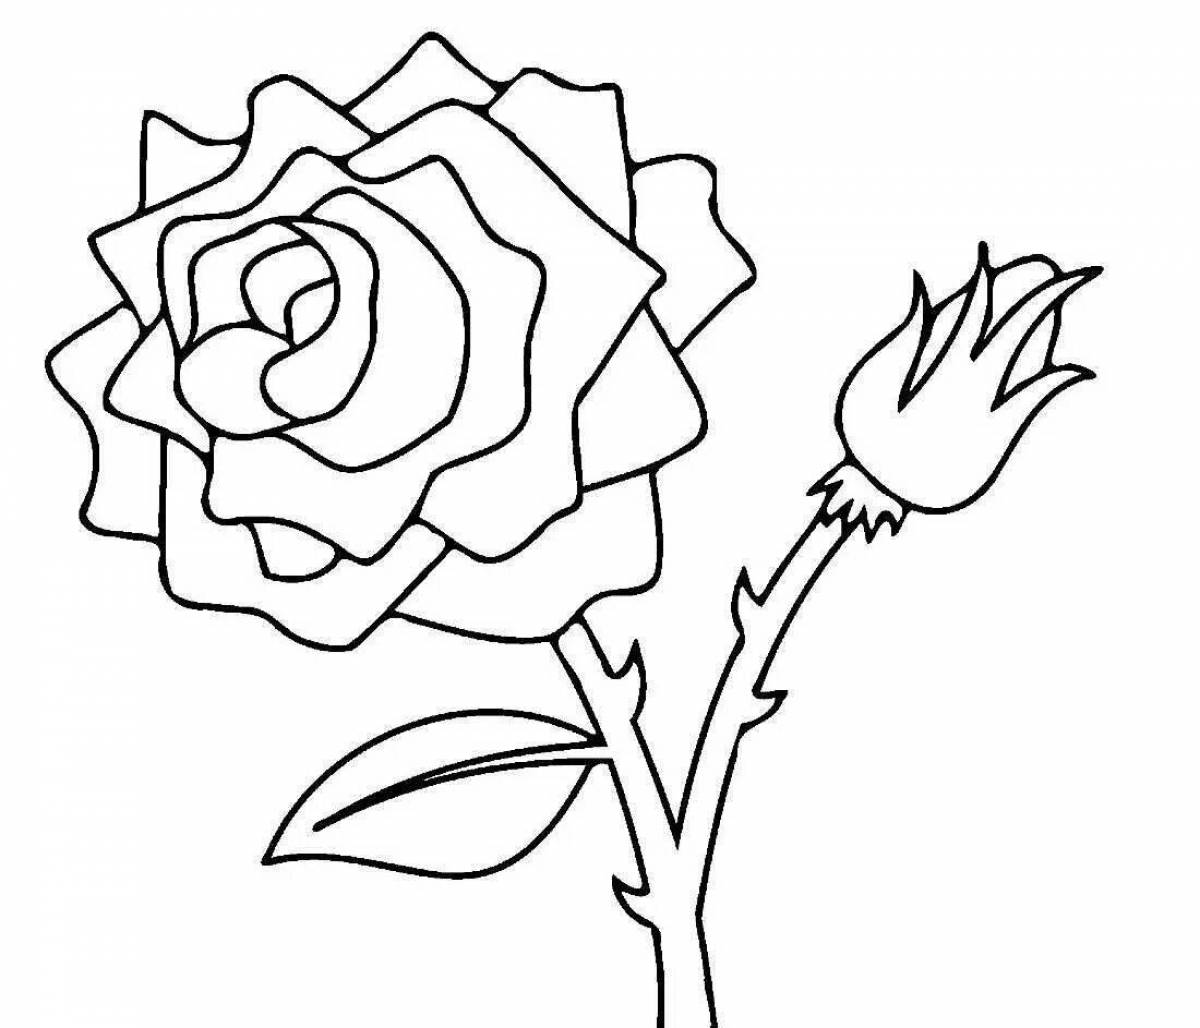 Blissful rose coloring book for kids 5-6 years old